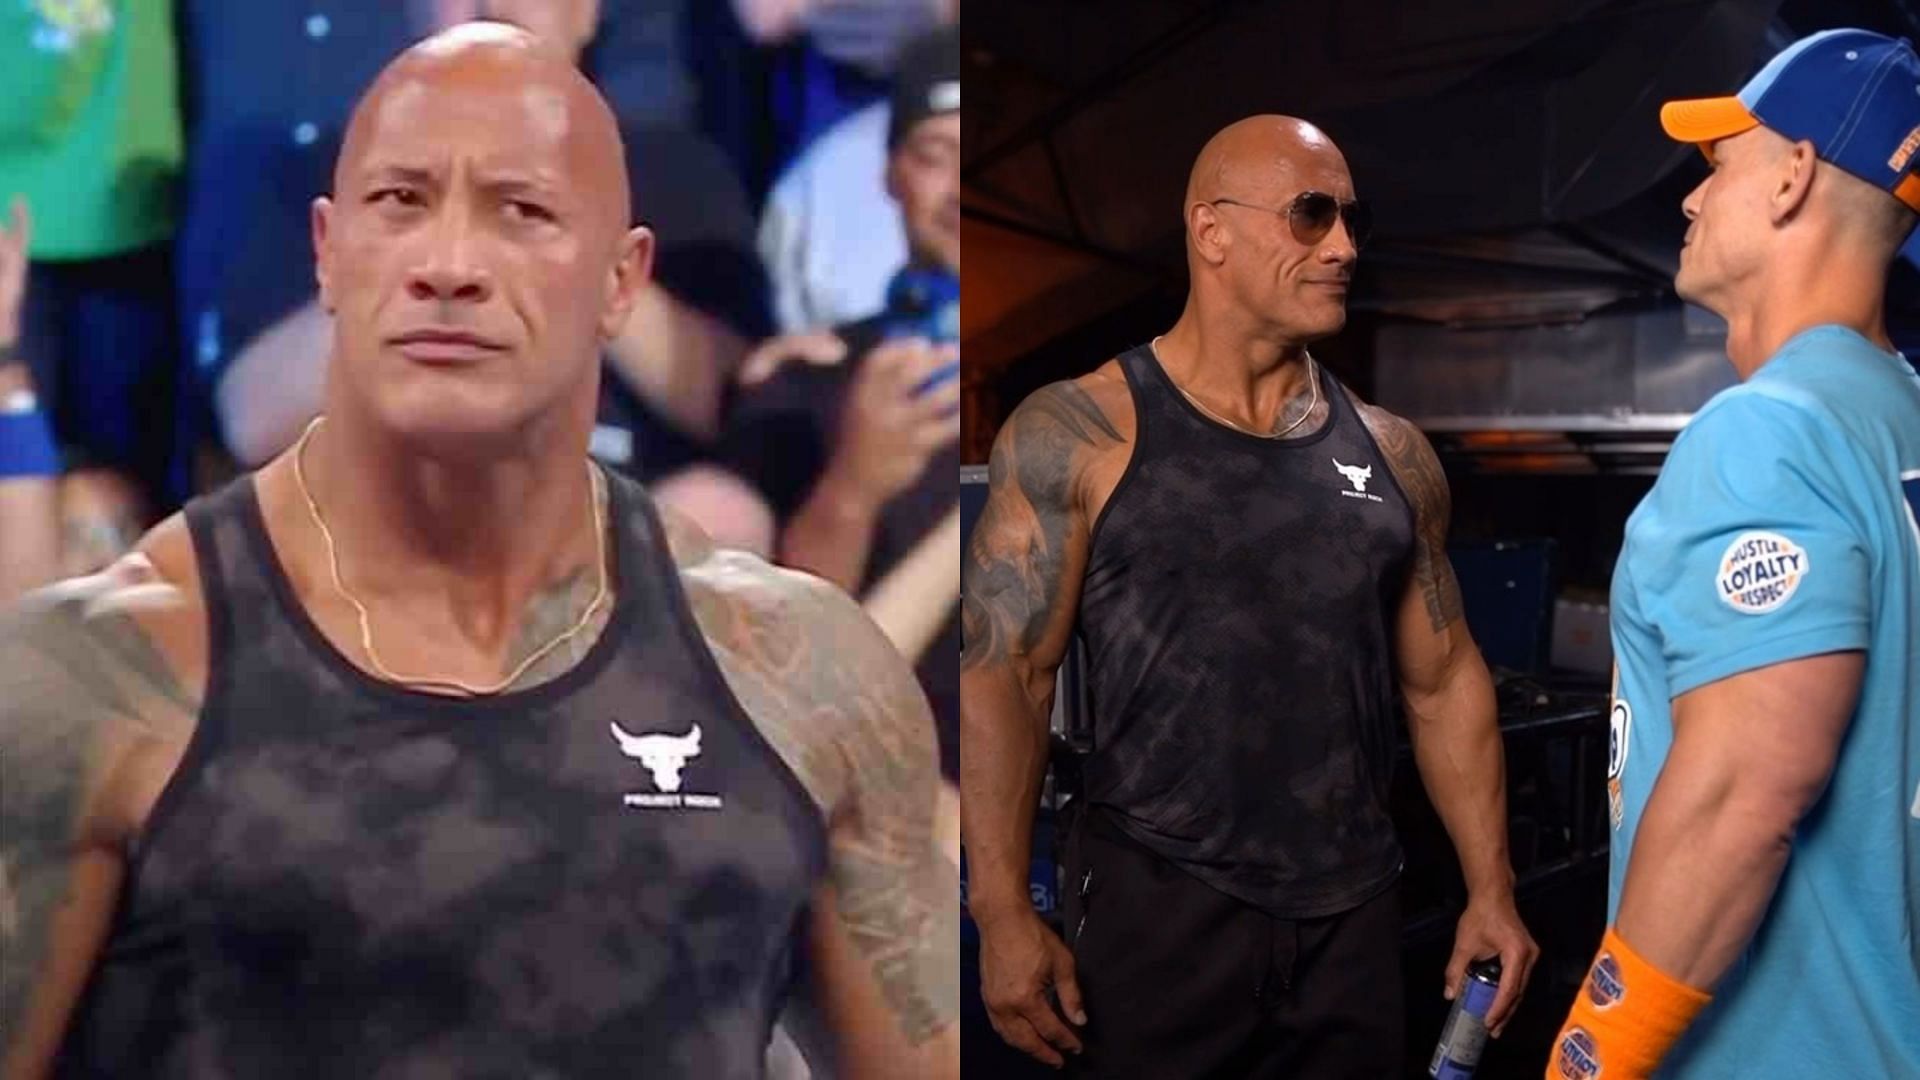 The Rock and John Cena recently returned to WWE